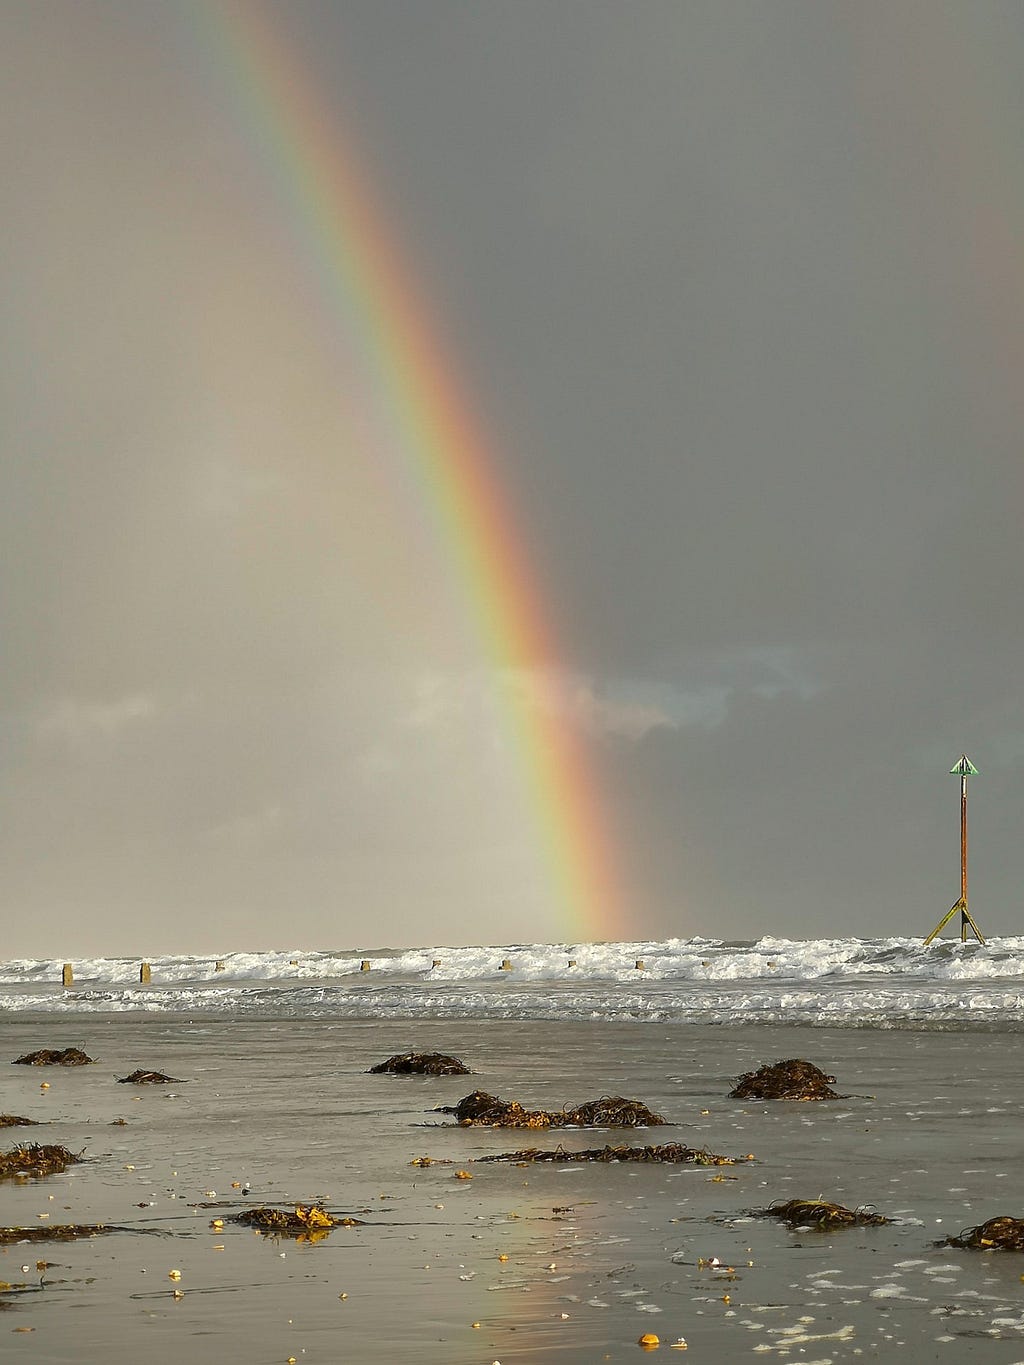 Dark skies out at sea and rainbow, waves and sand in foreground